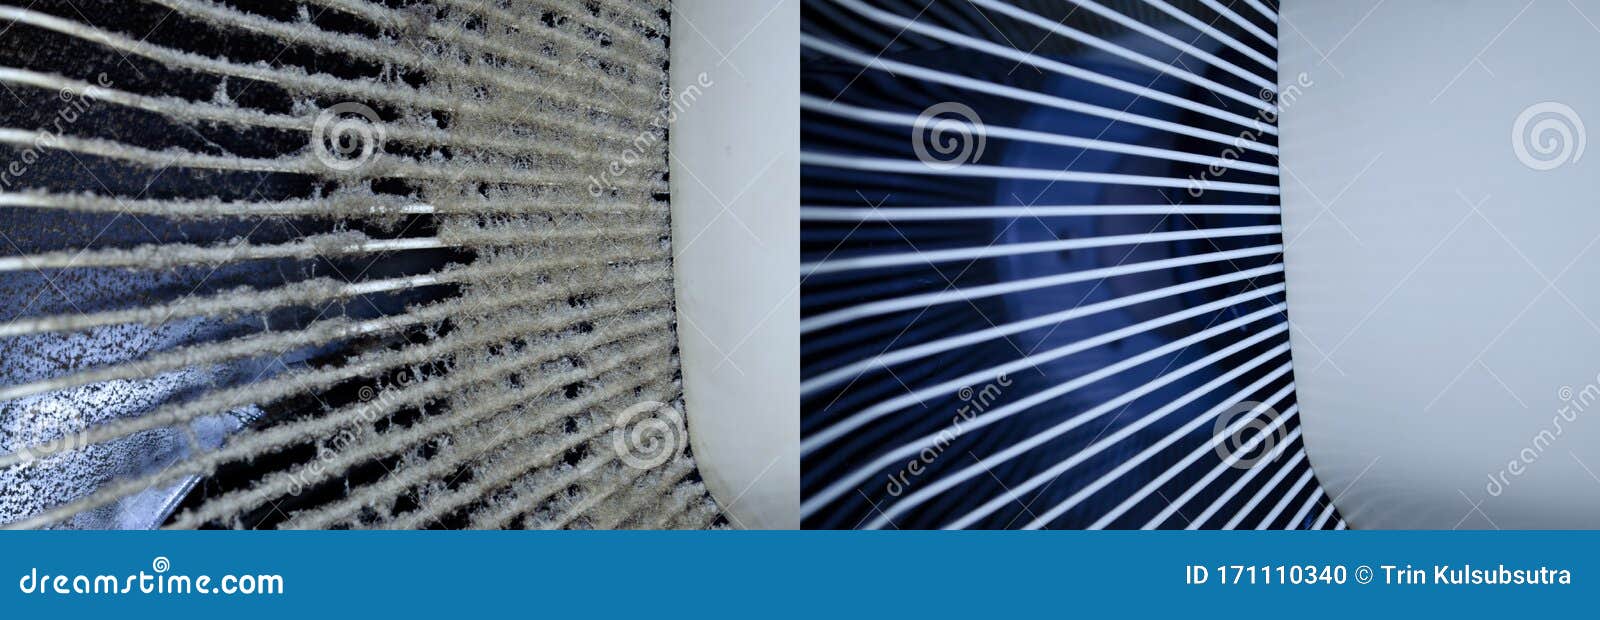 dust and dirt accumulate on the back grille of the fan. before and after cleaning